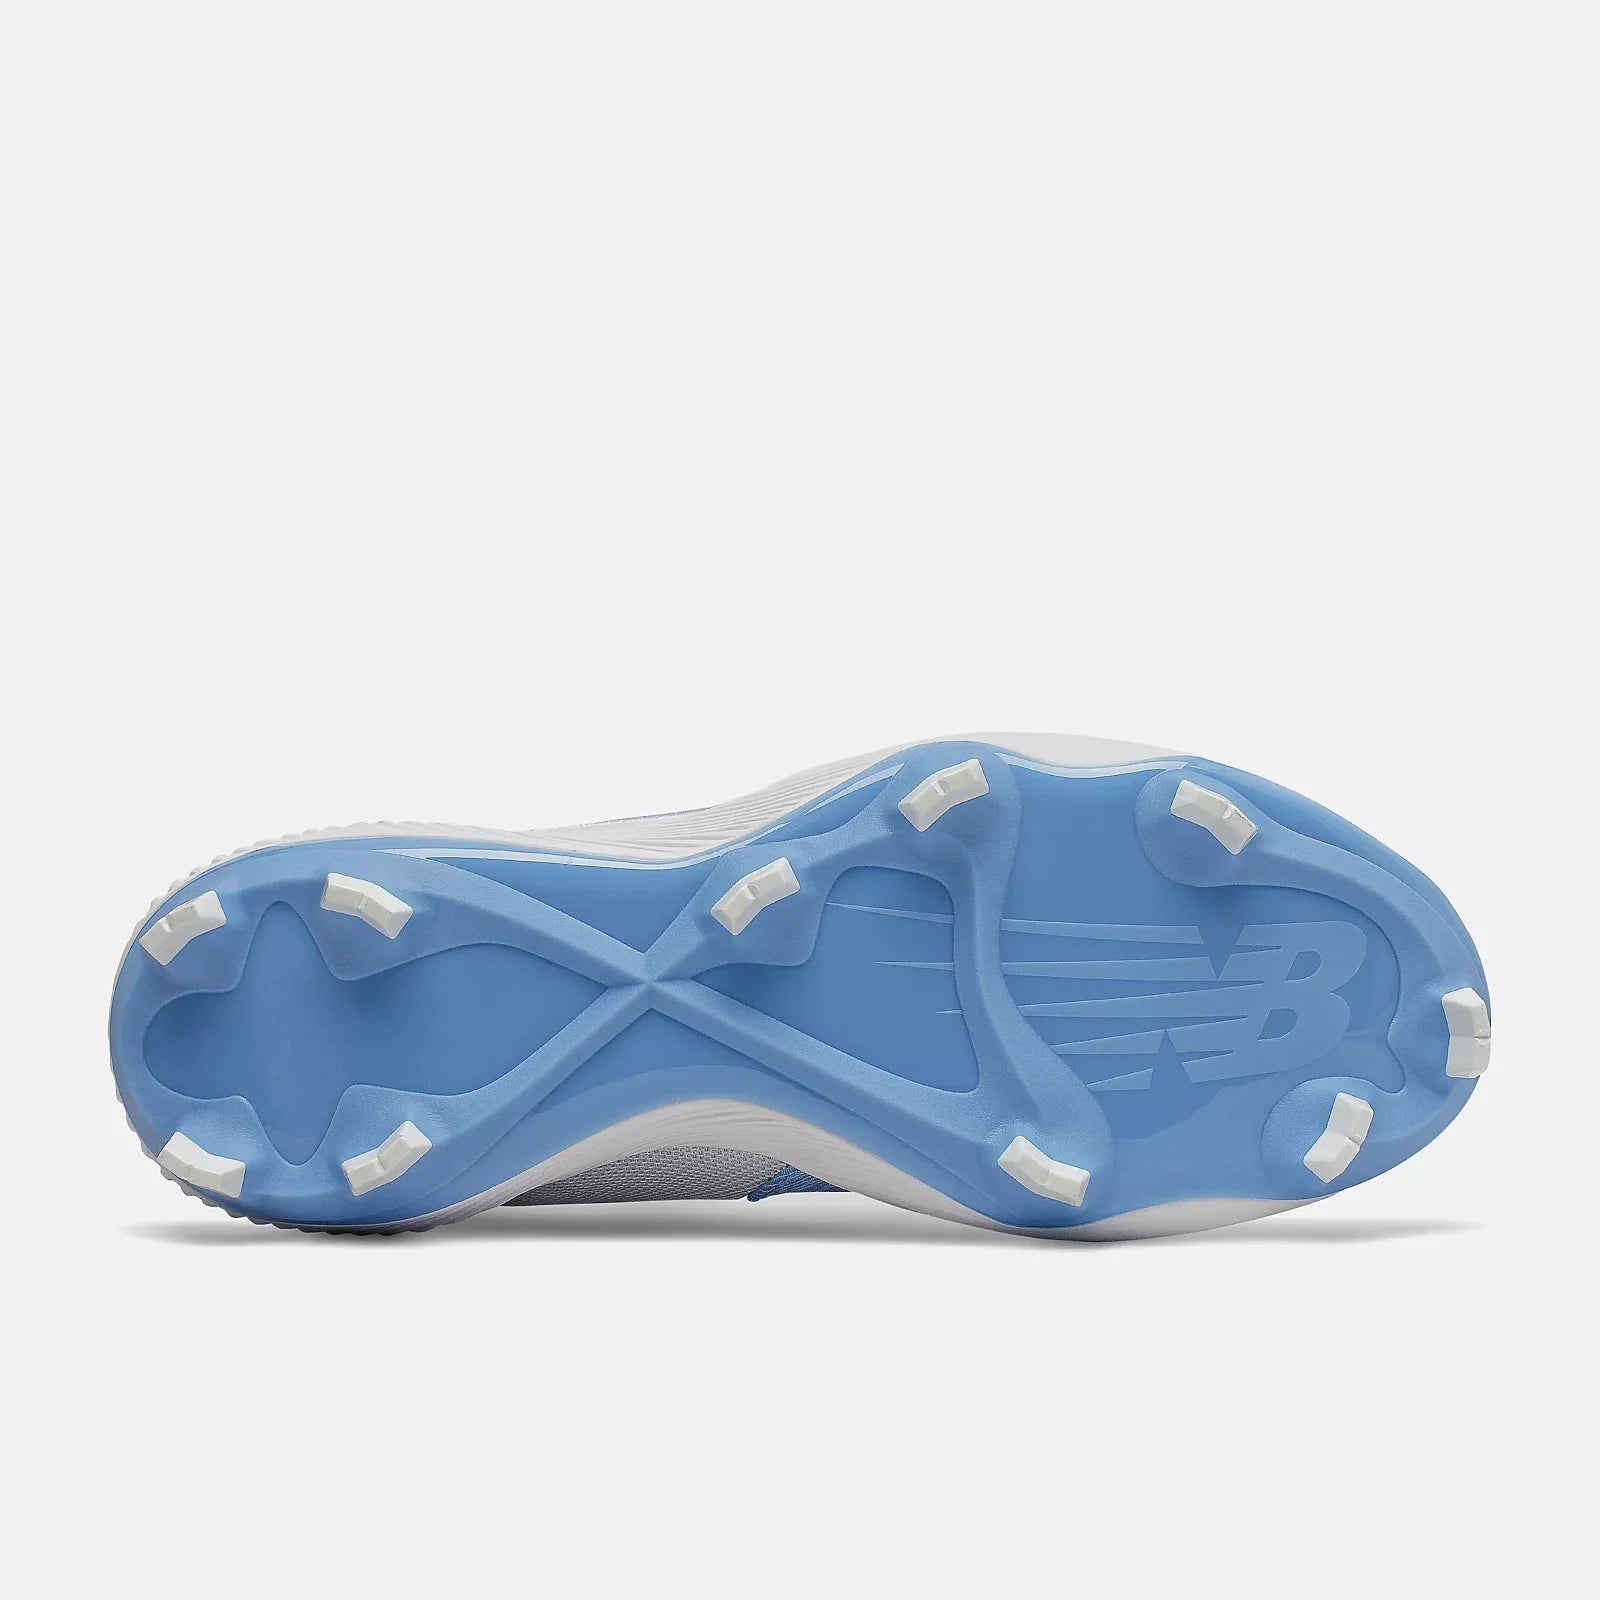 New Balance - C. Blue/White FuelCell 4040v6 Molded Cleats (PL4040S6)